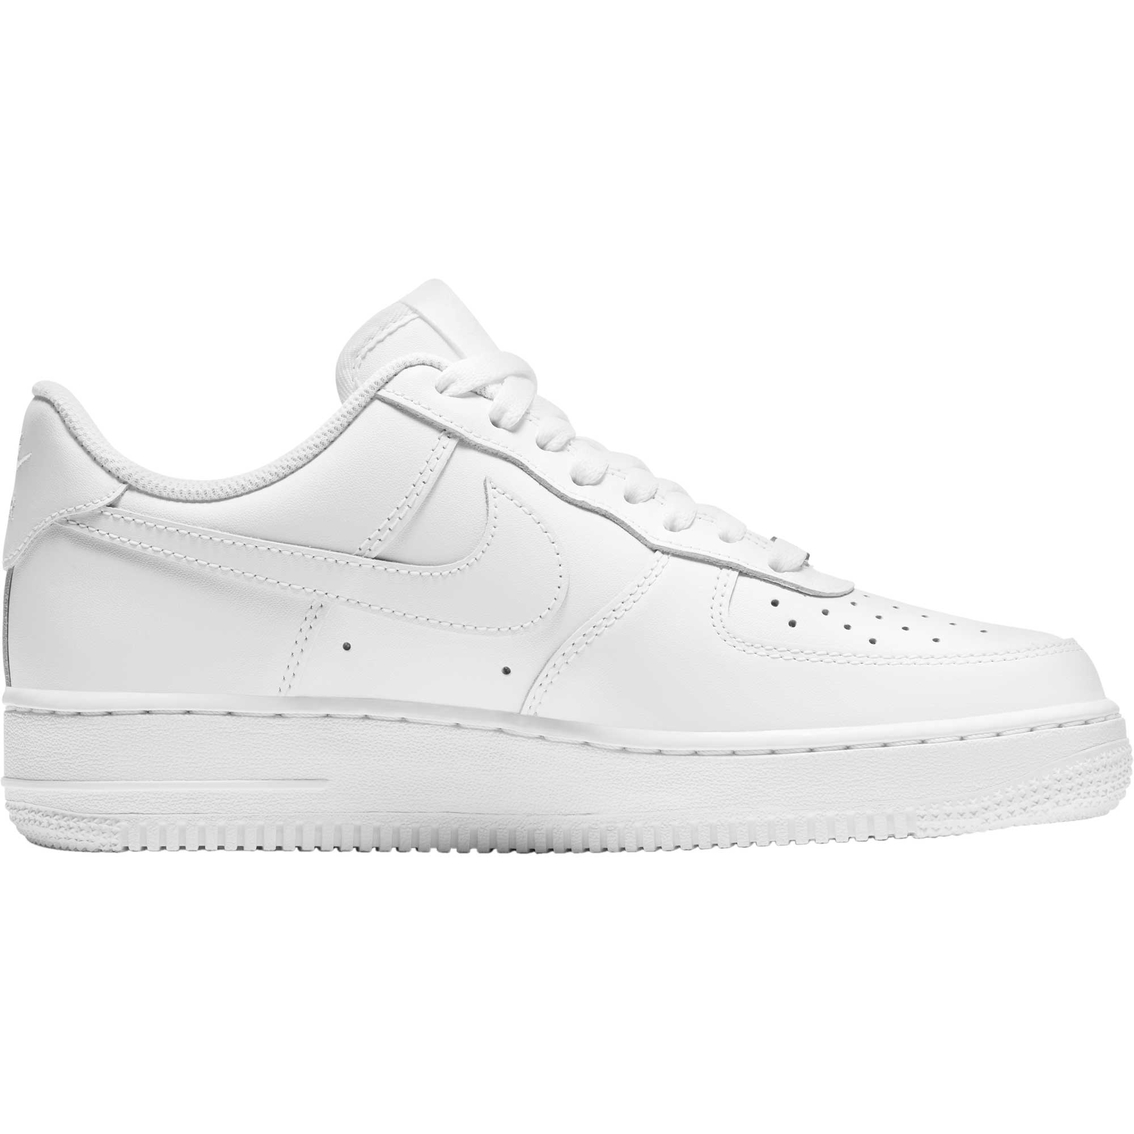 Nike Women's Air Force 1 07 Athleisure Shoes - Image 10 of 10